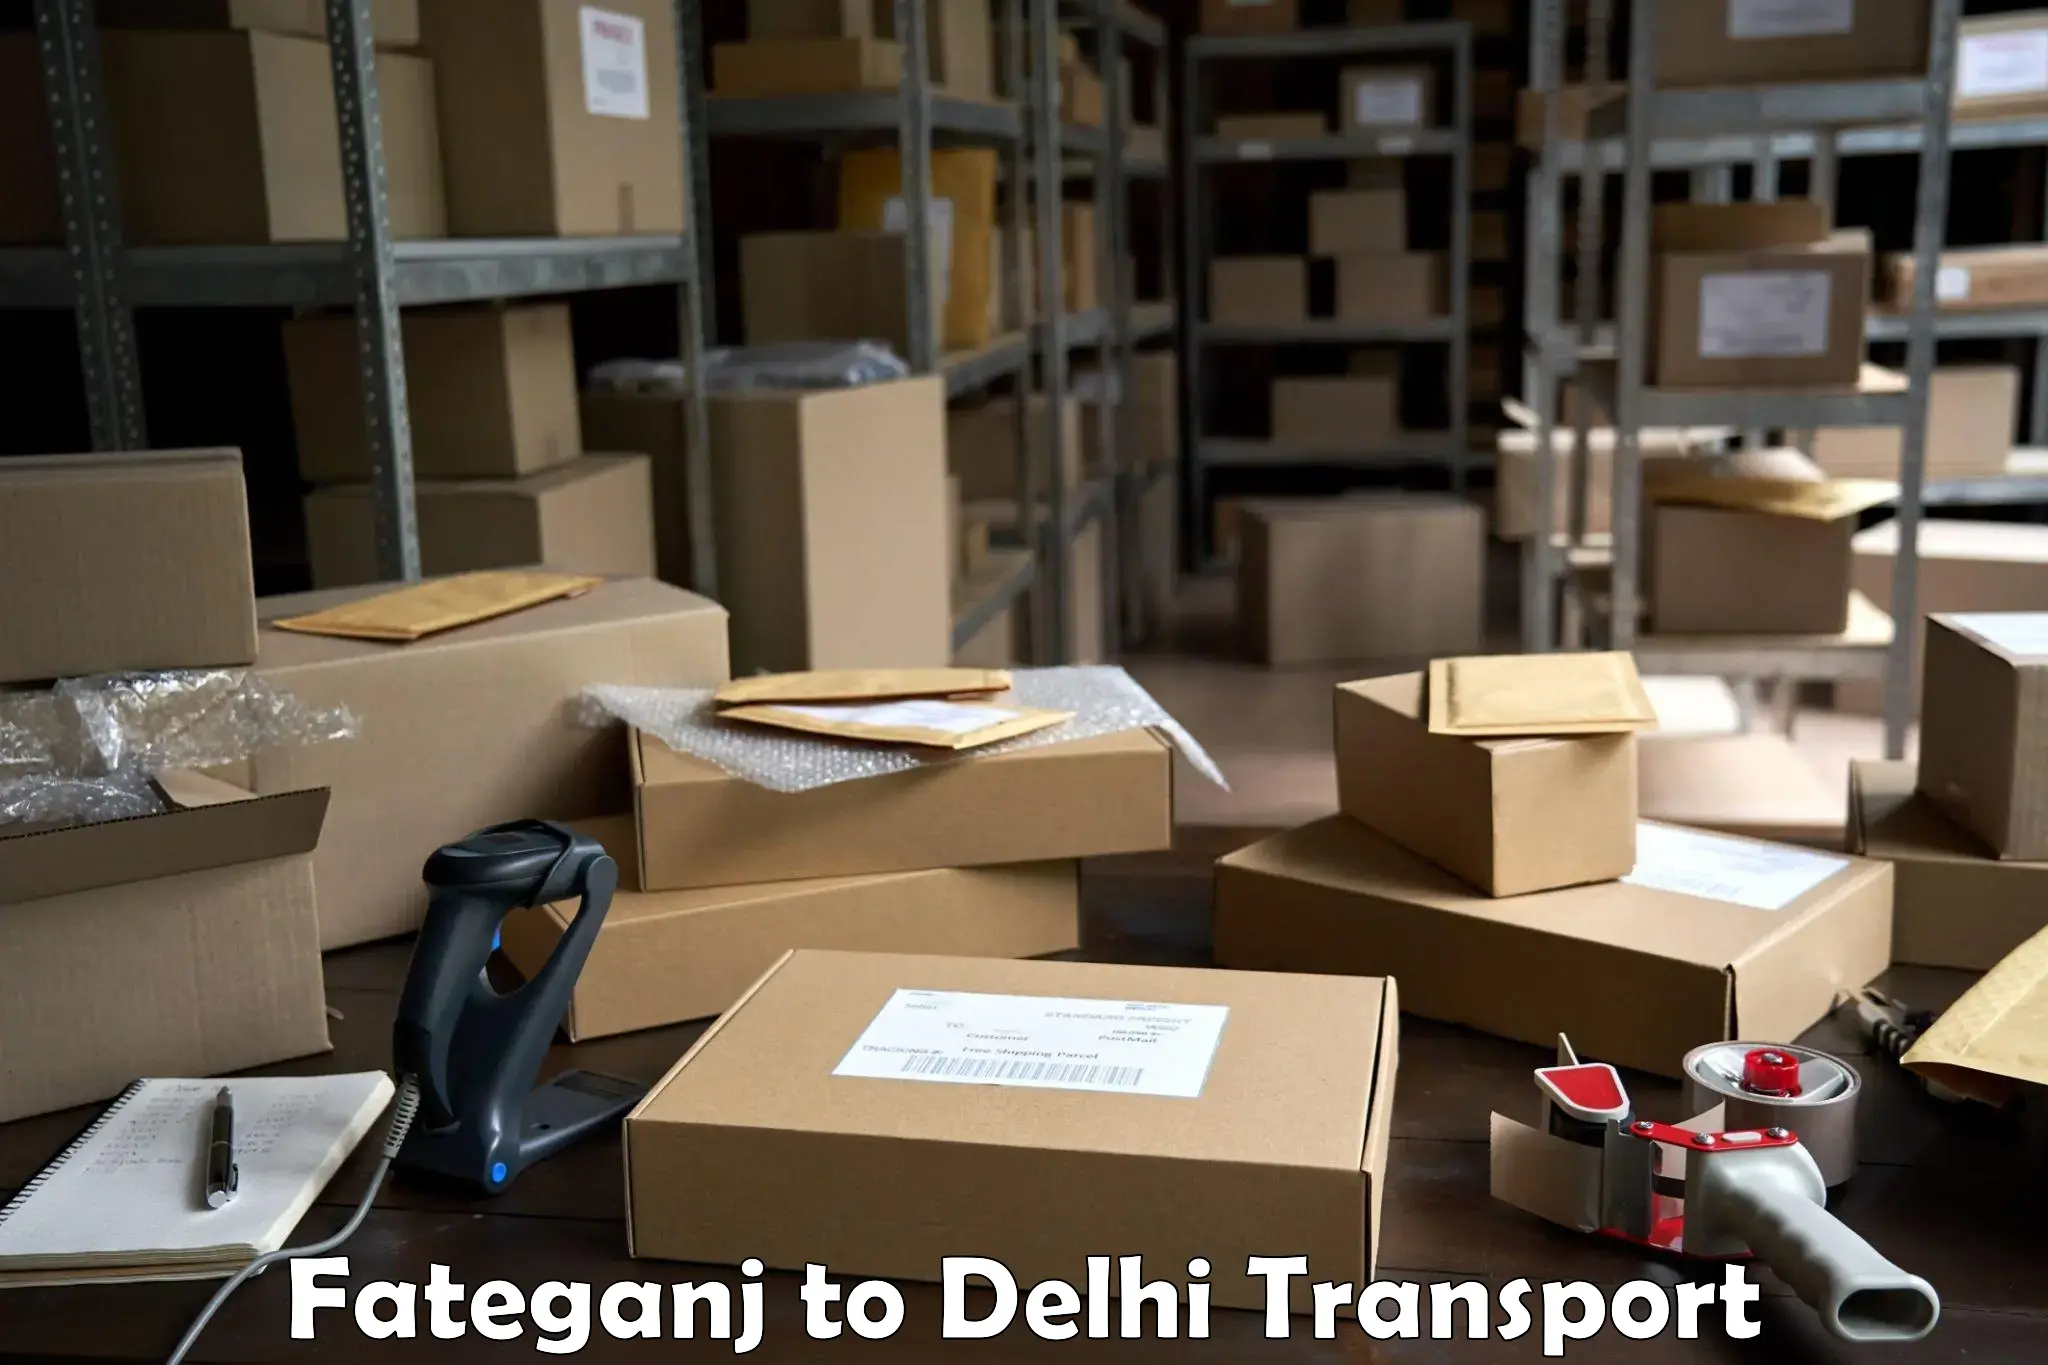 Container transport service Fateganj to NCR